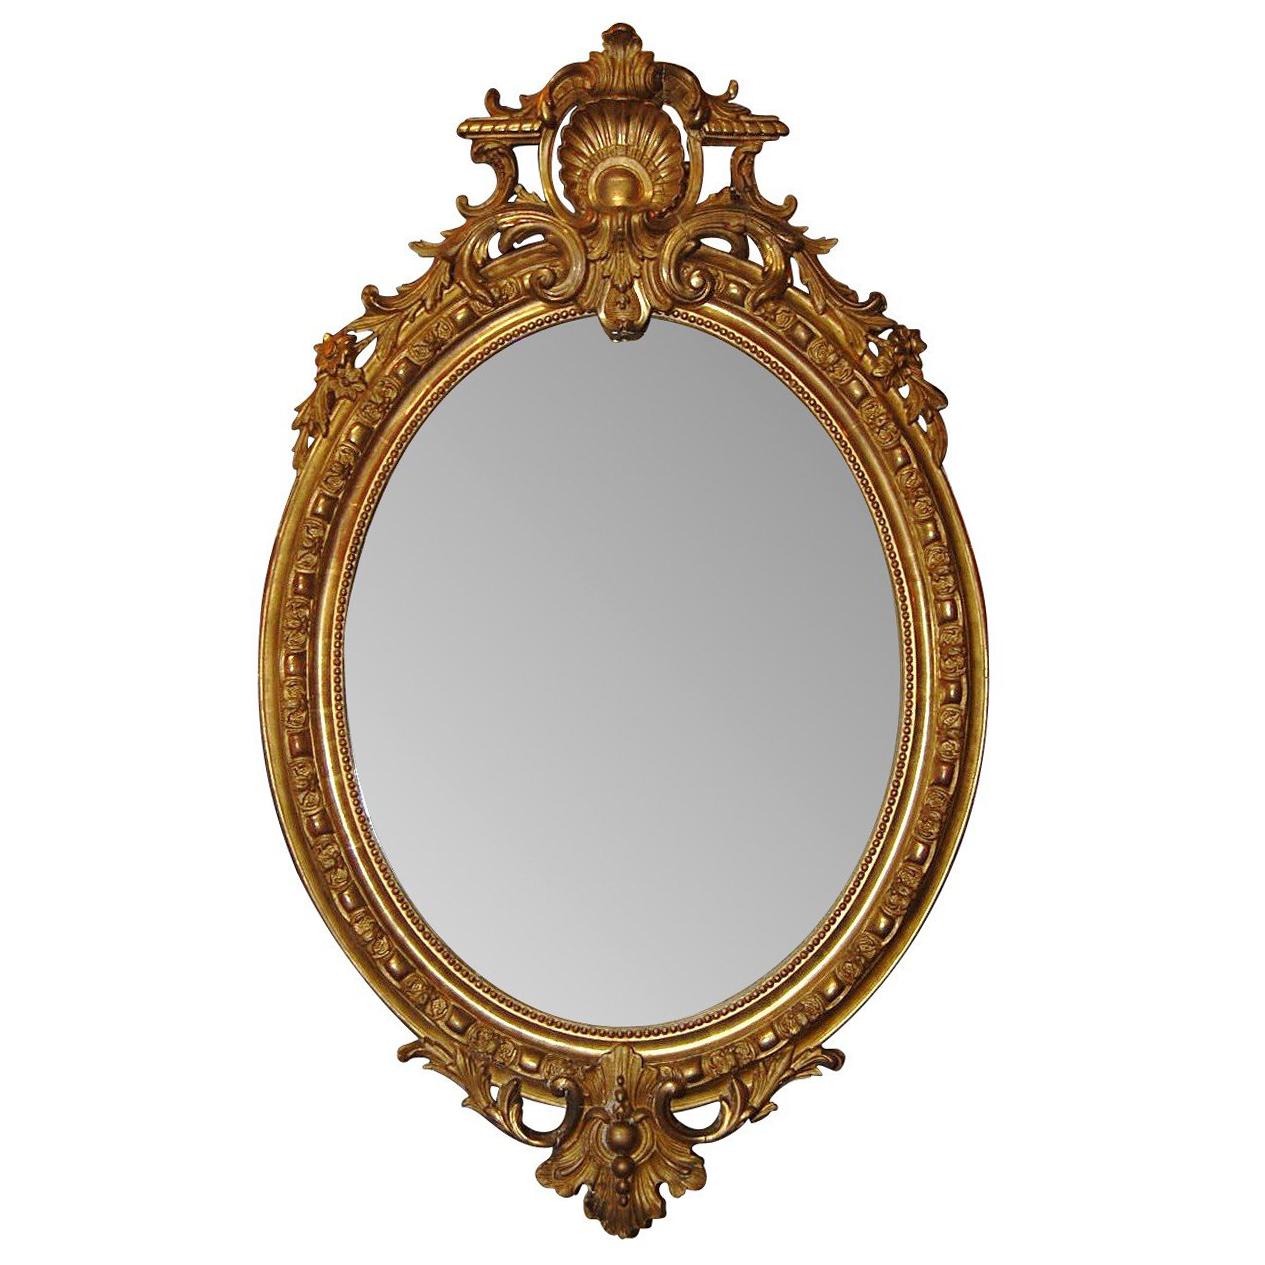 19th Century French Louis XV Oval Gilt Wood Mirror